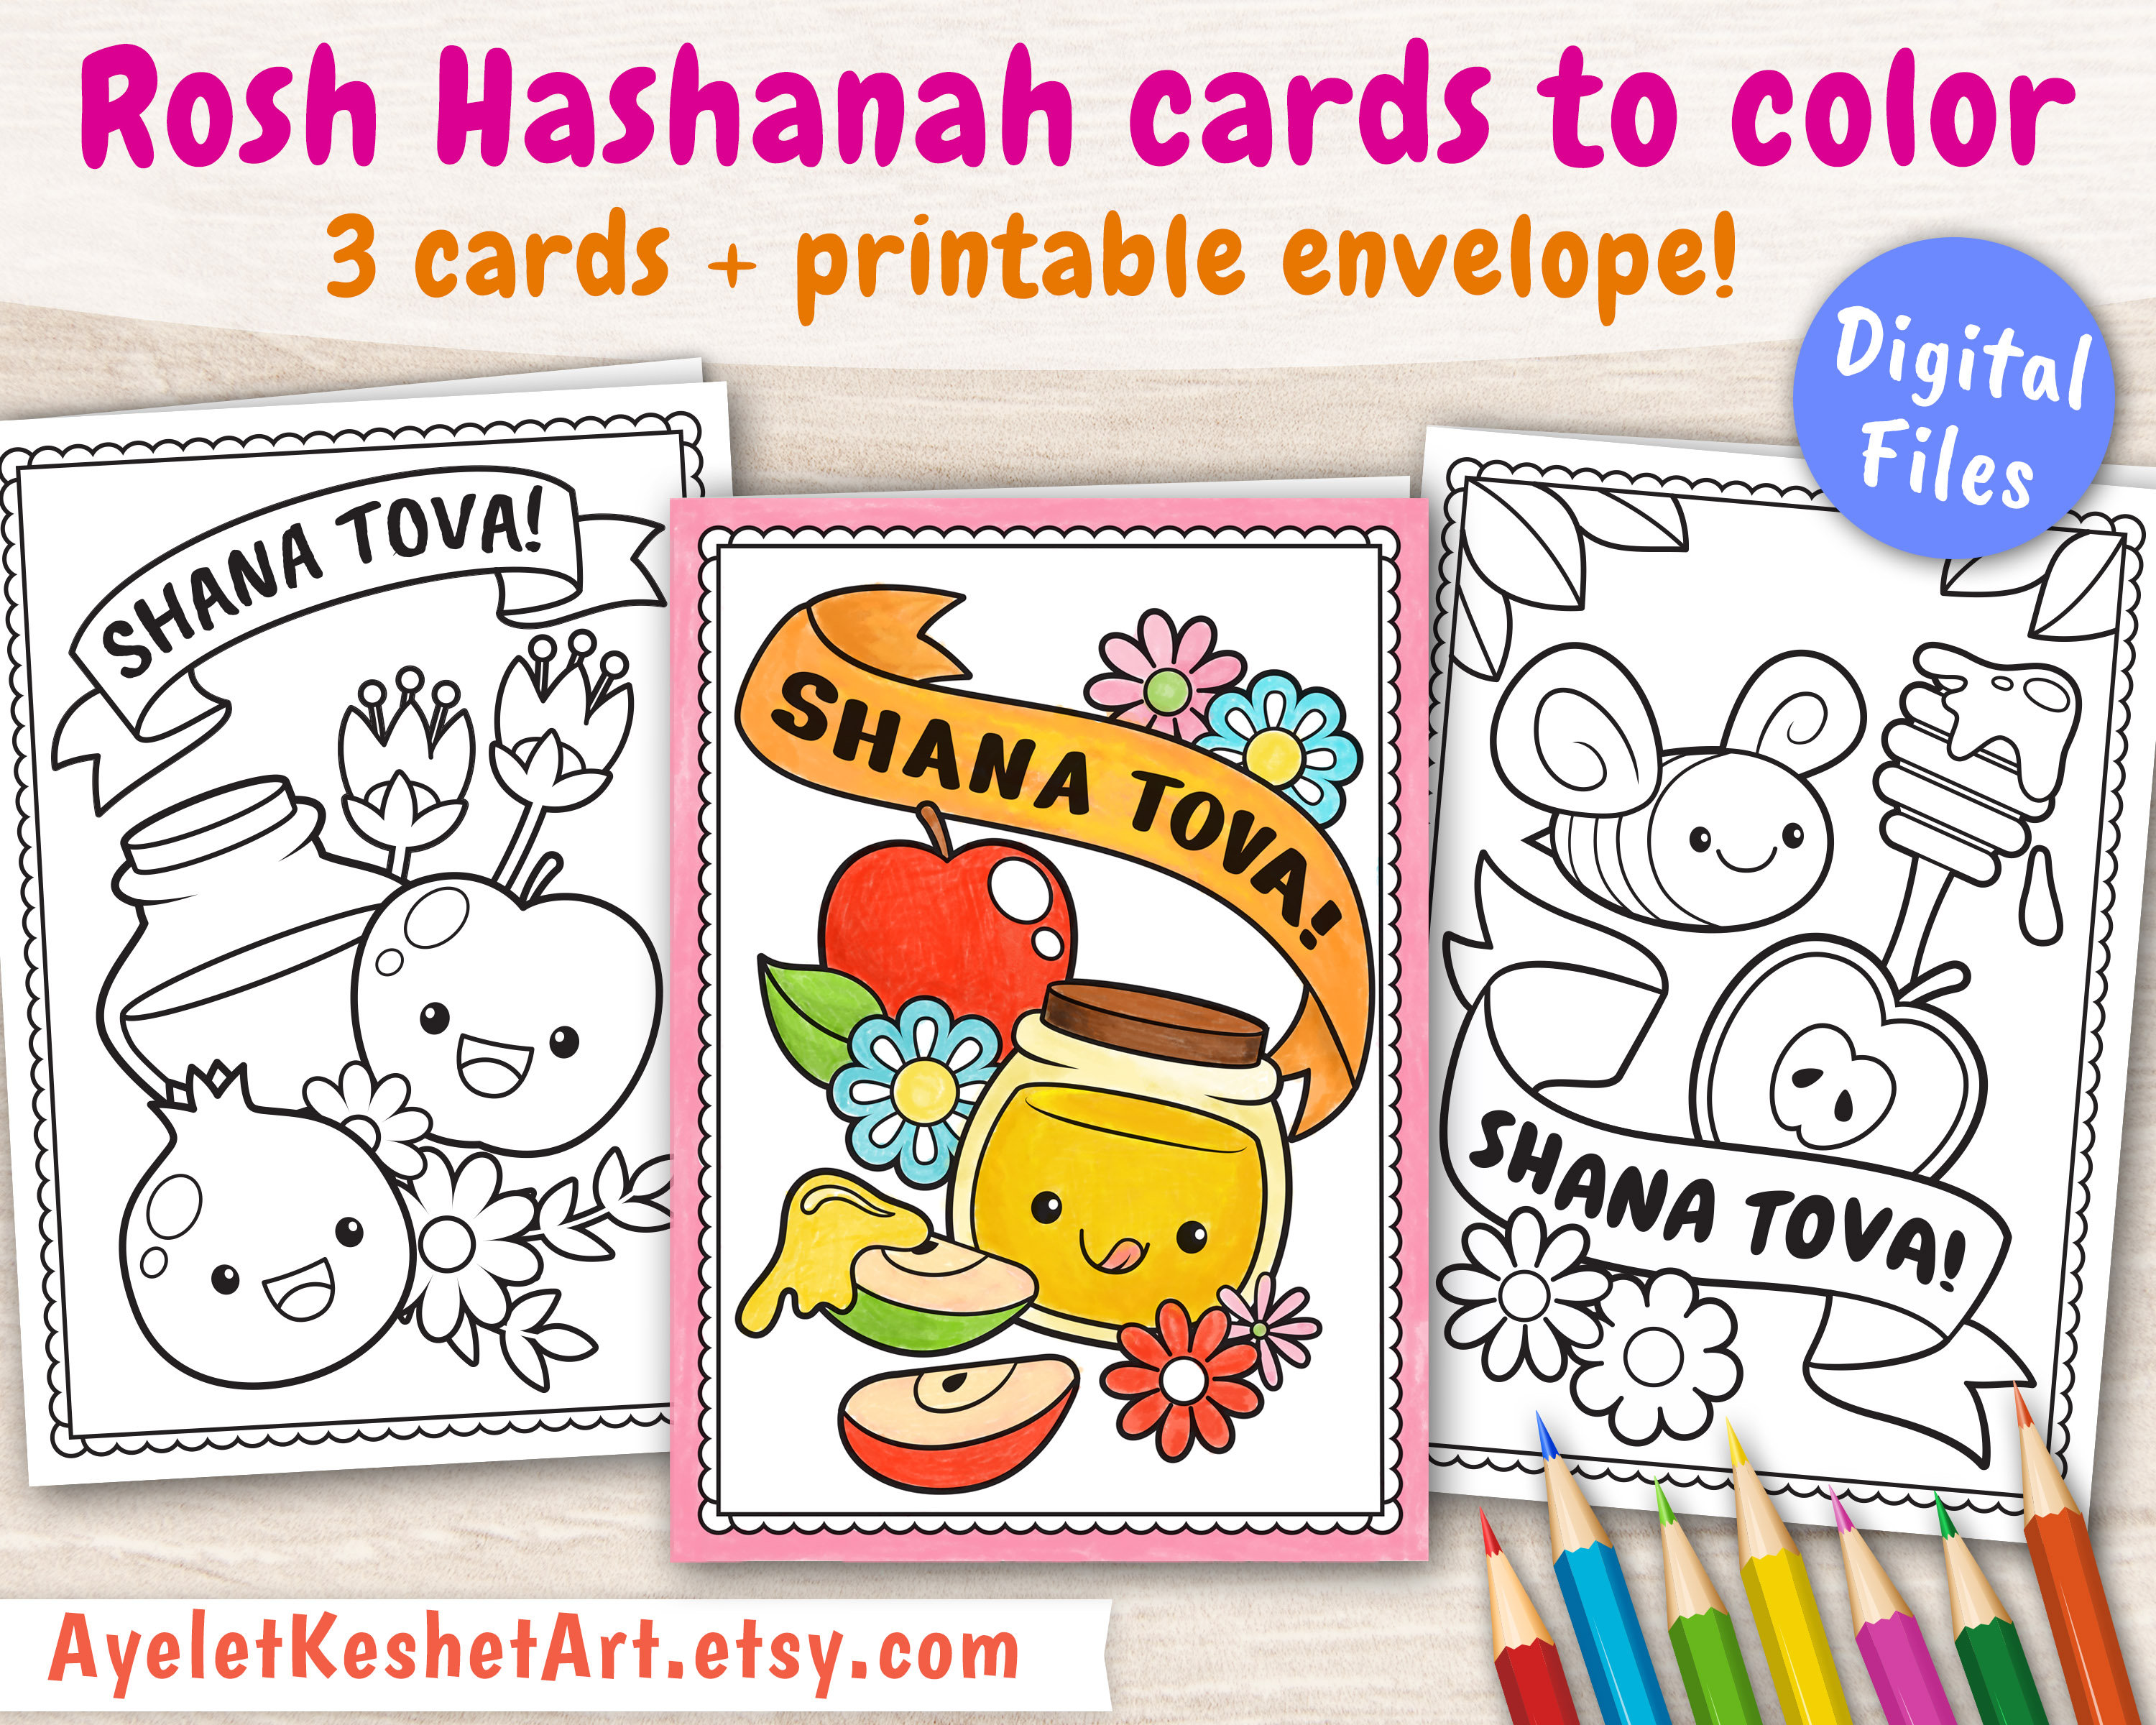 Rosh hashanah cards to color coloring pages of shana tova cards cute kawaii printable greeting cards instant download pdf